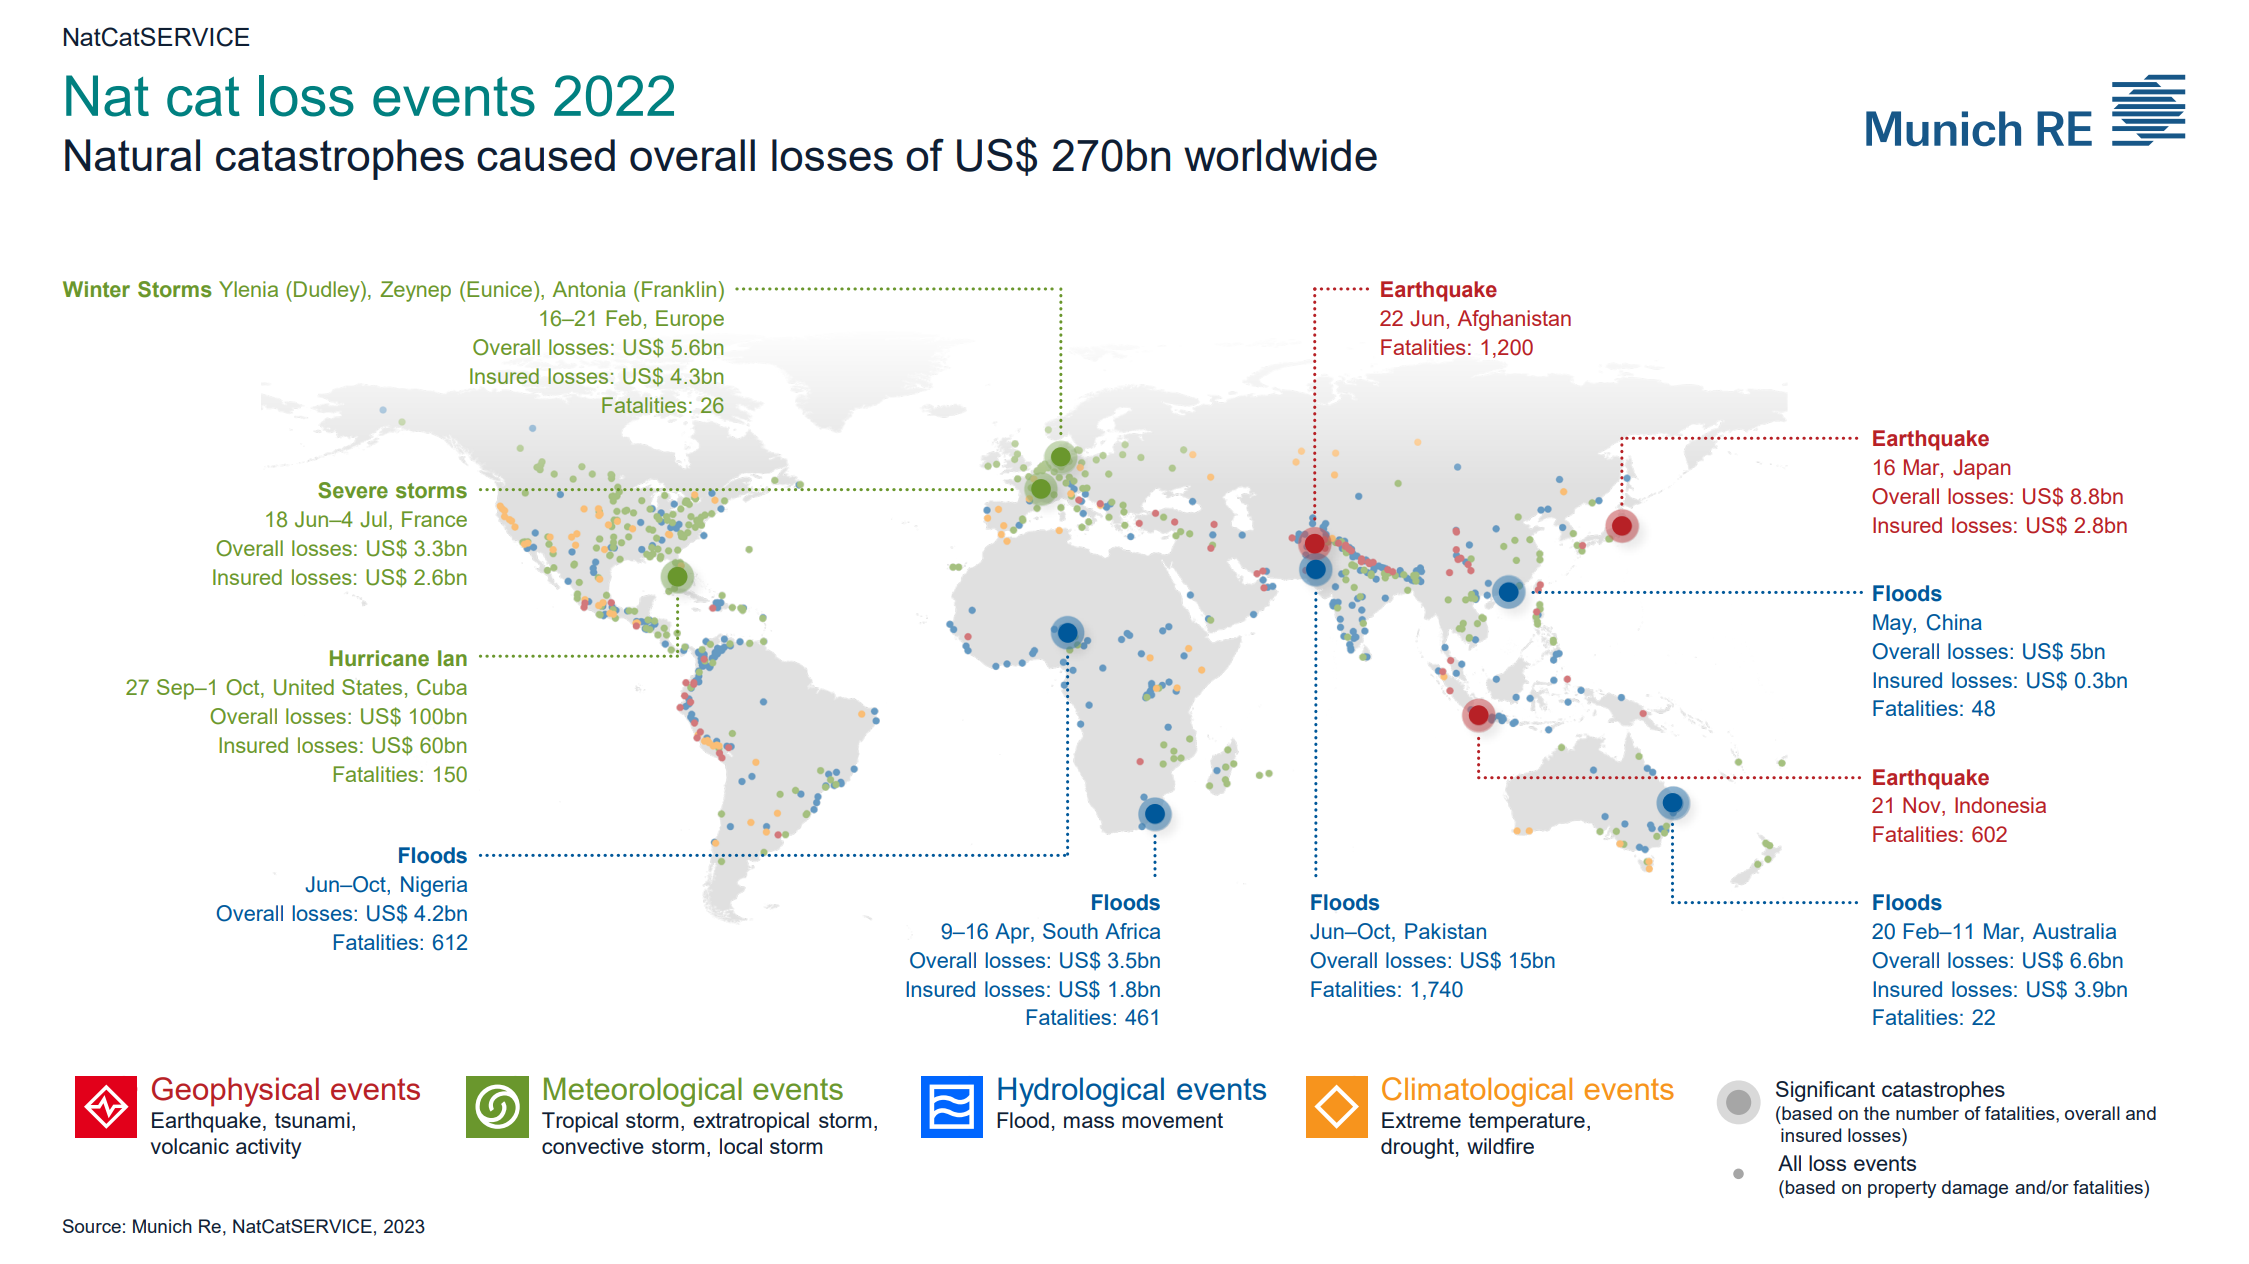 Map showing natural catastrophe loss events in 2022. Natural catastrophes caused overall losses of US$270 billion worldwide. Data: Munich Re, NatCatSERVICE, 2023. Graphic: Munich Re